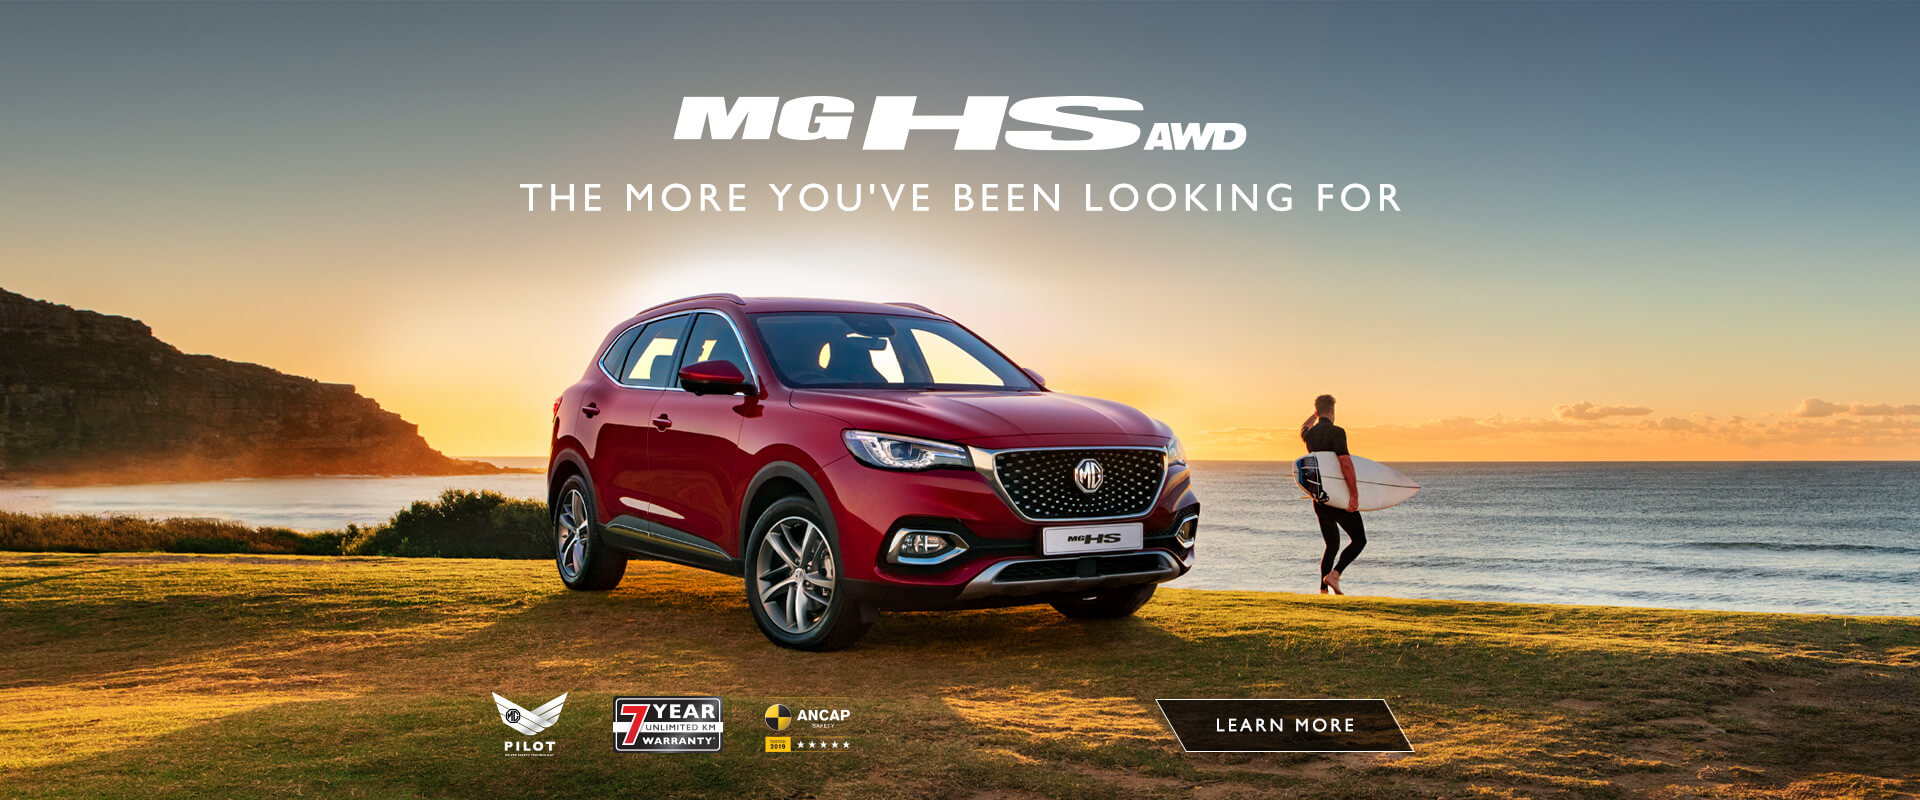 MG HS AWD. The more you've been looking for.